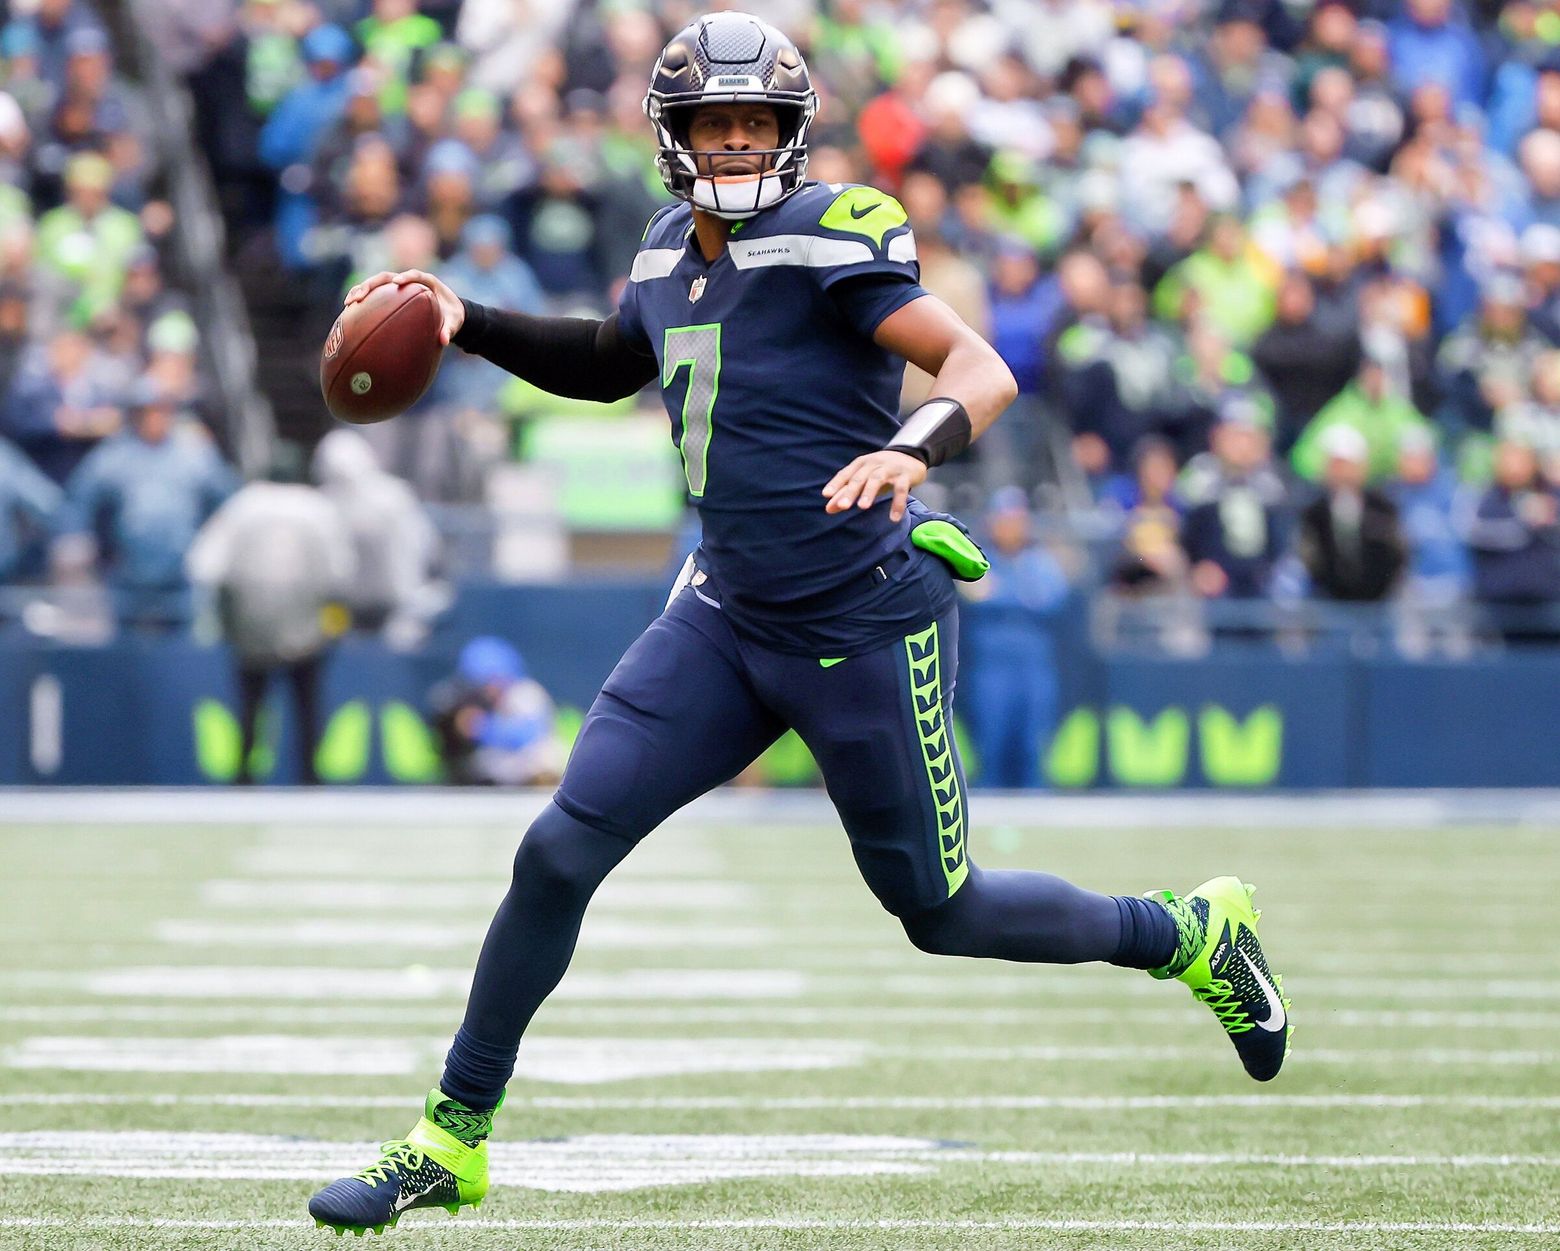 In NFL full of instability, Geno Smith stabilizes the QB spot for Seahawks  | The Seattle Times